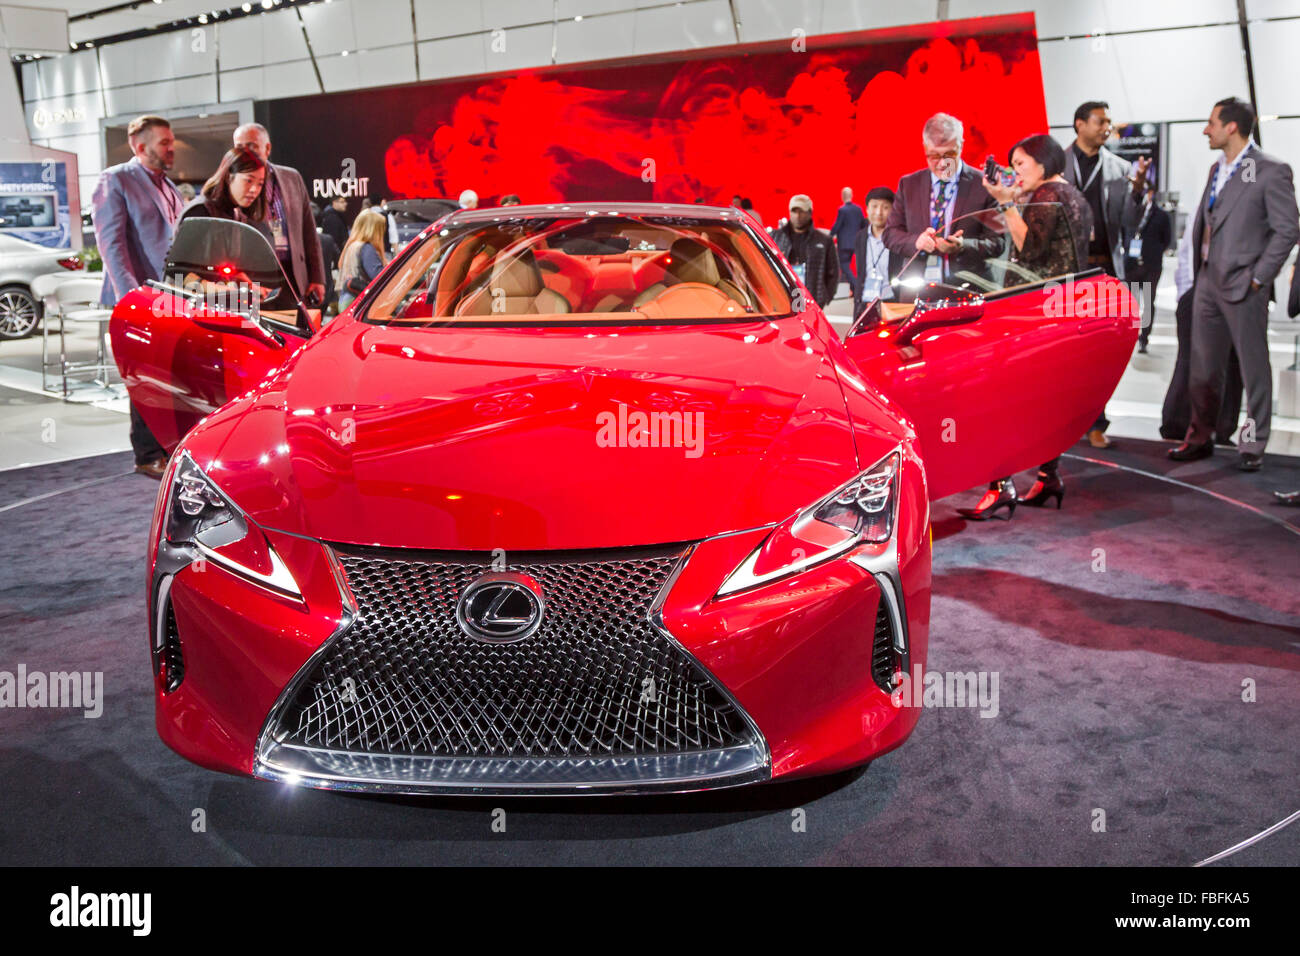 Detroit, Michigan - The Lexus LC 500 on display at the North American International Auto Show. Stock Photo